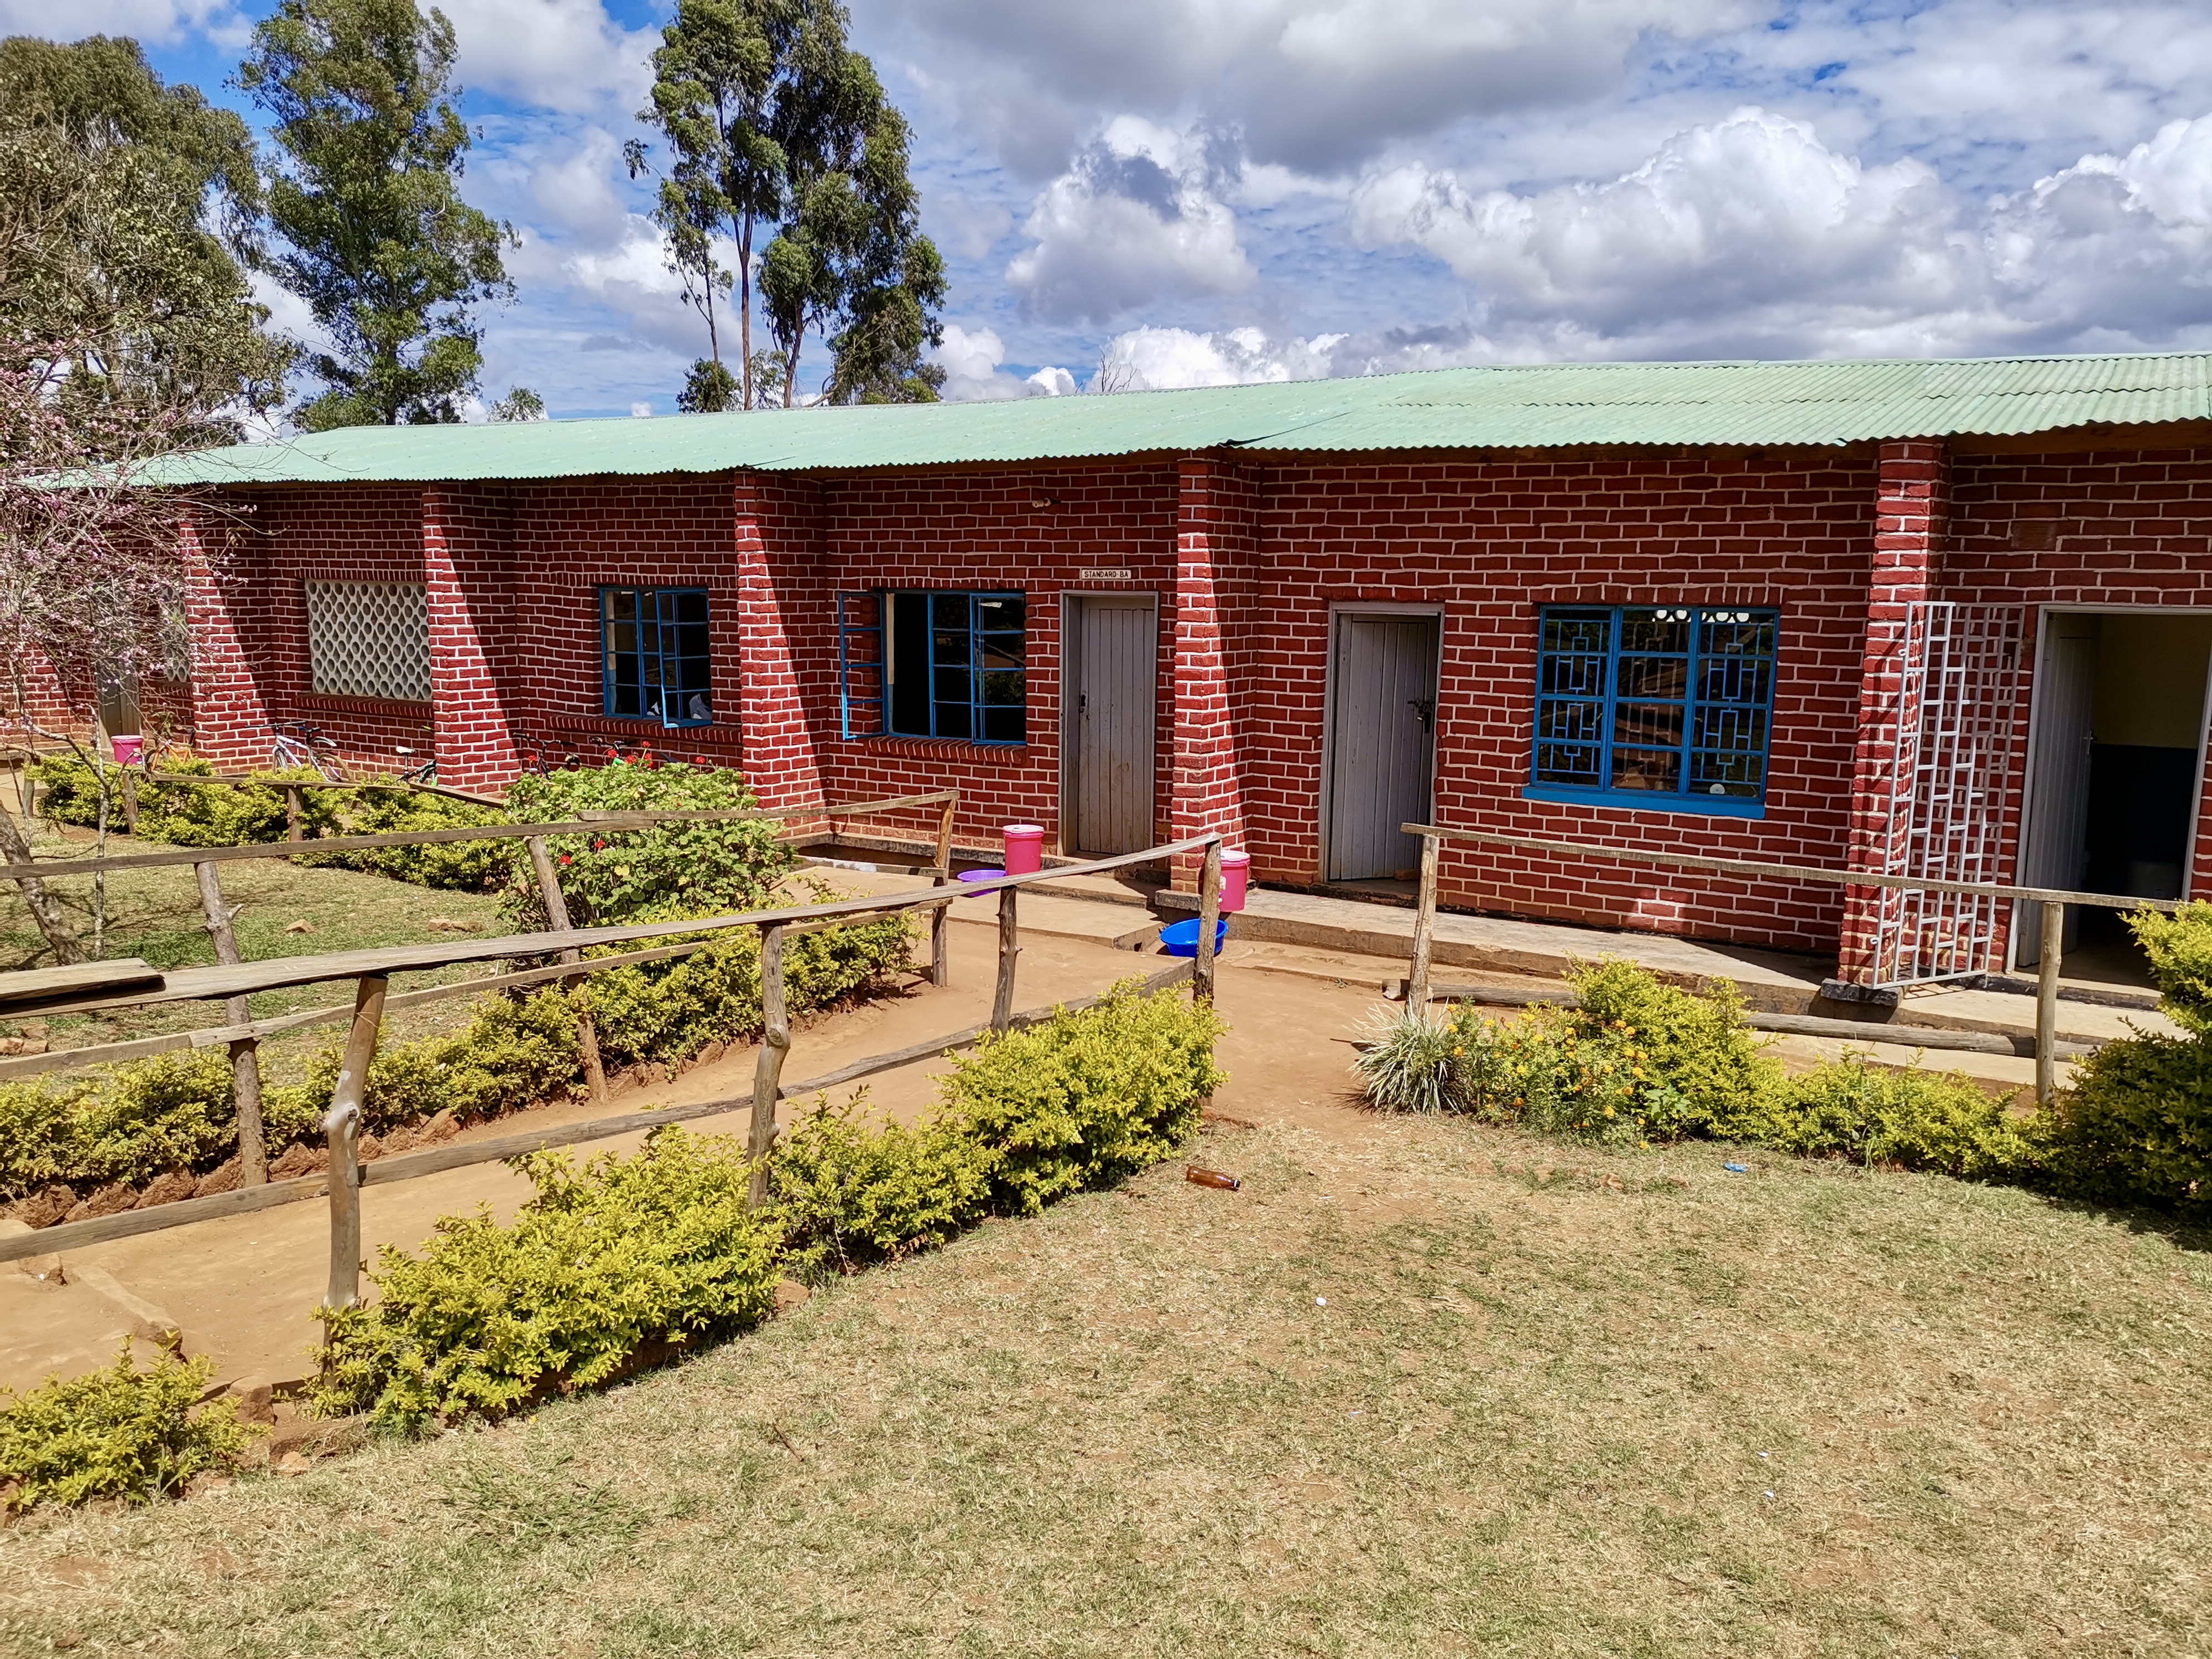 Classrooms with hand washing stations outside each door